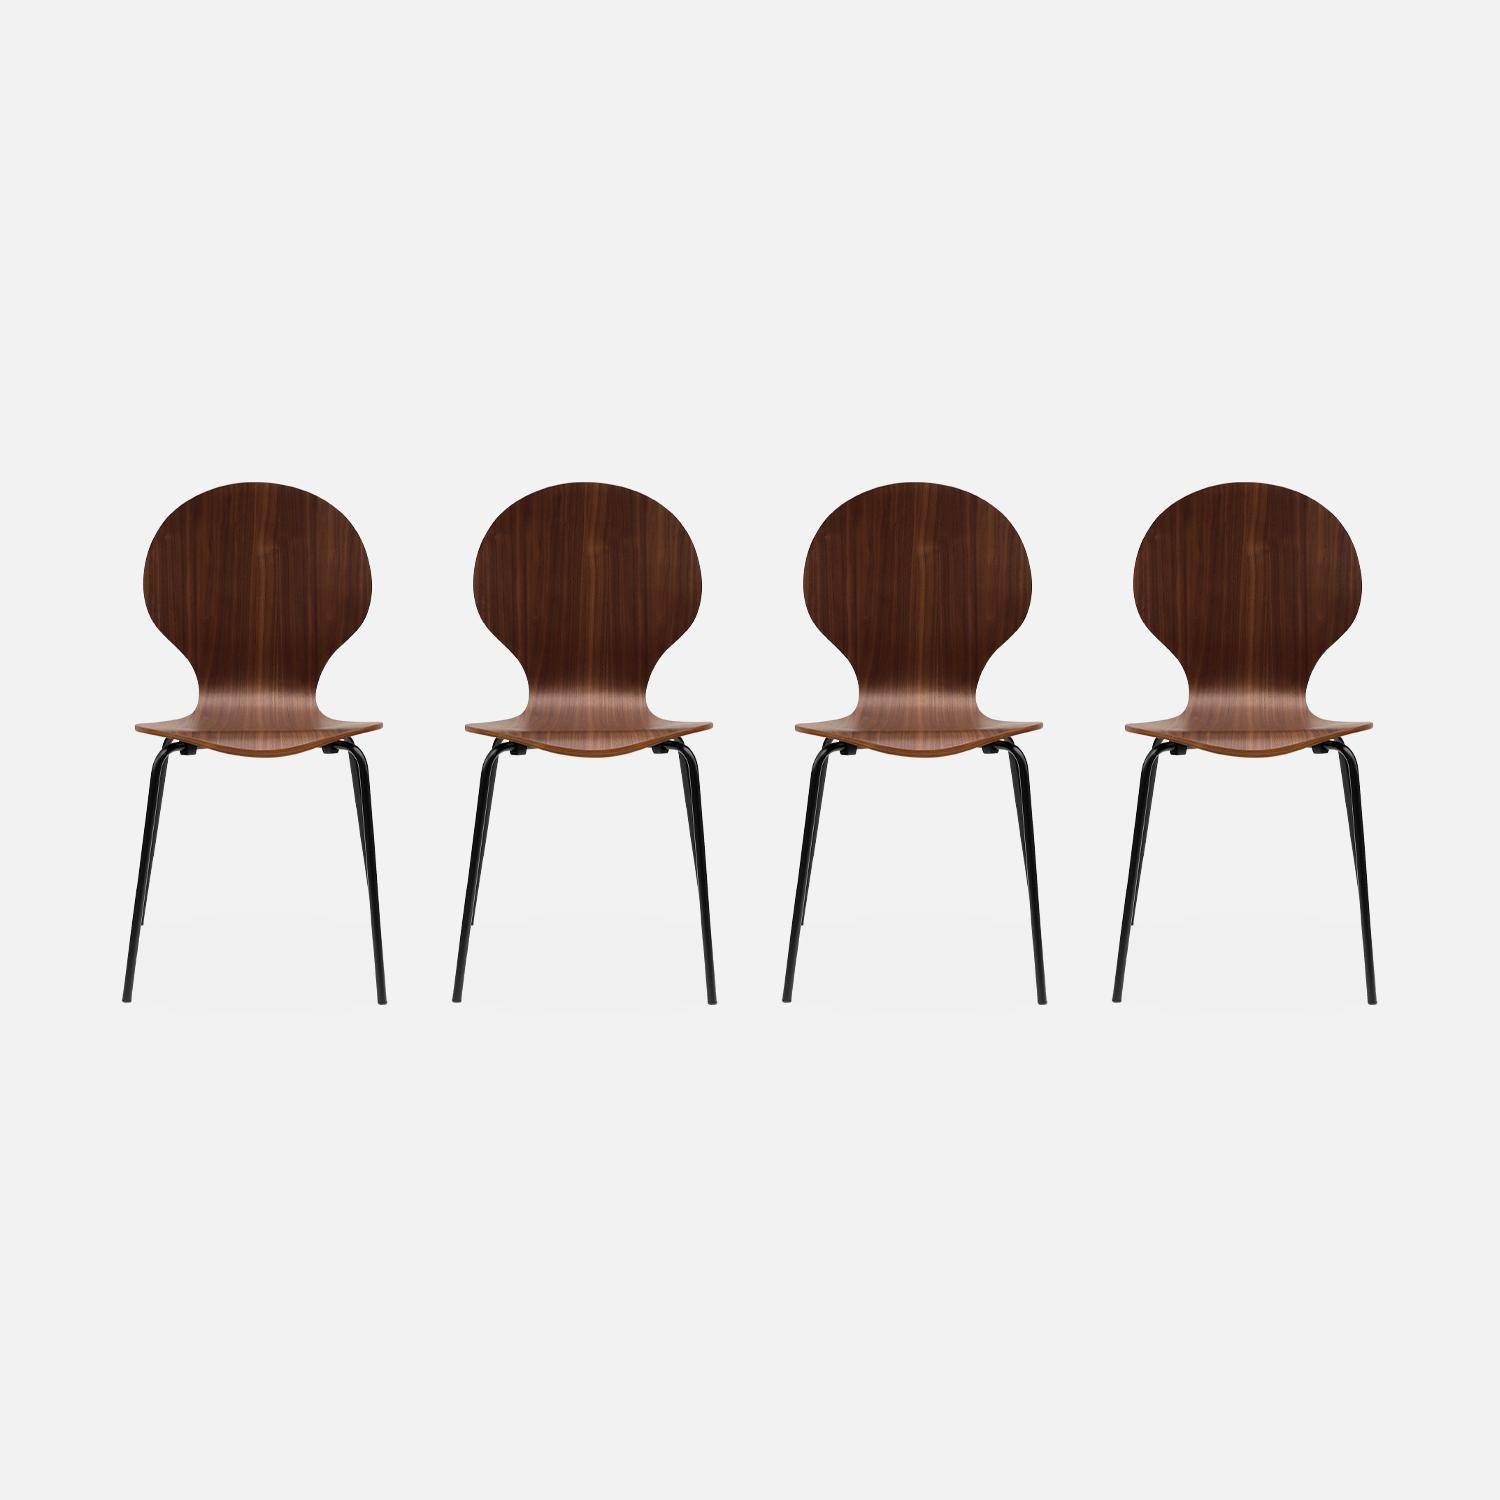 Set of 4 stackable Retro Chairs, Wood and Plywood, L43xW48xH87cm, brown,sweeek,Photo3